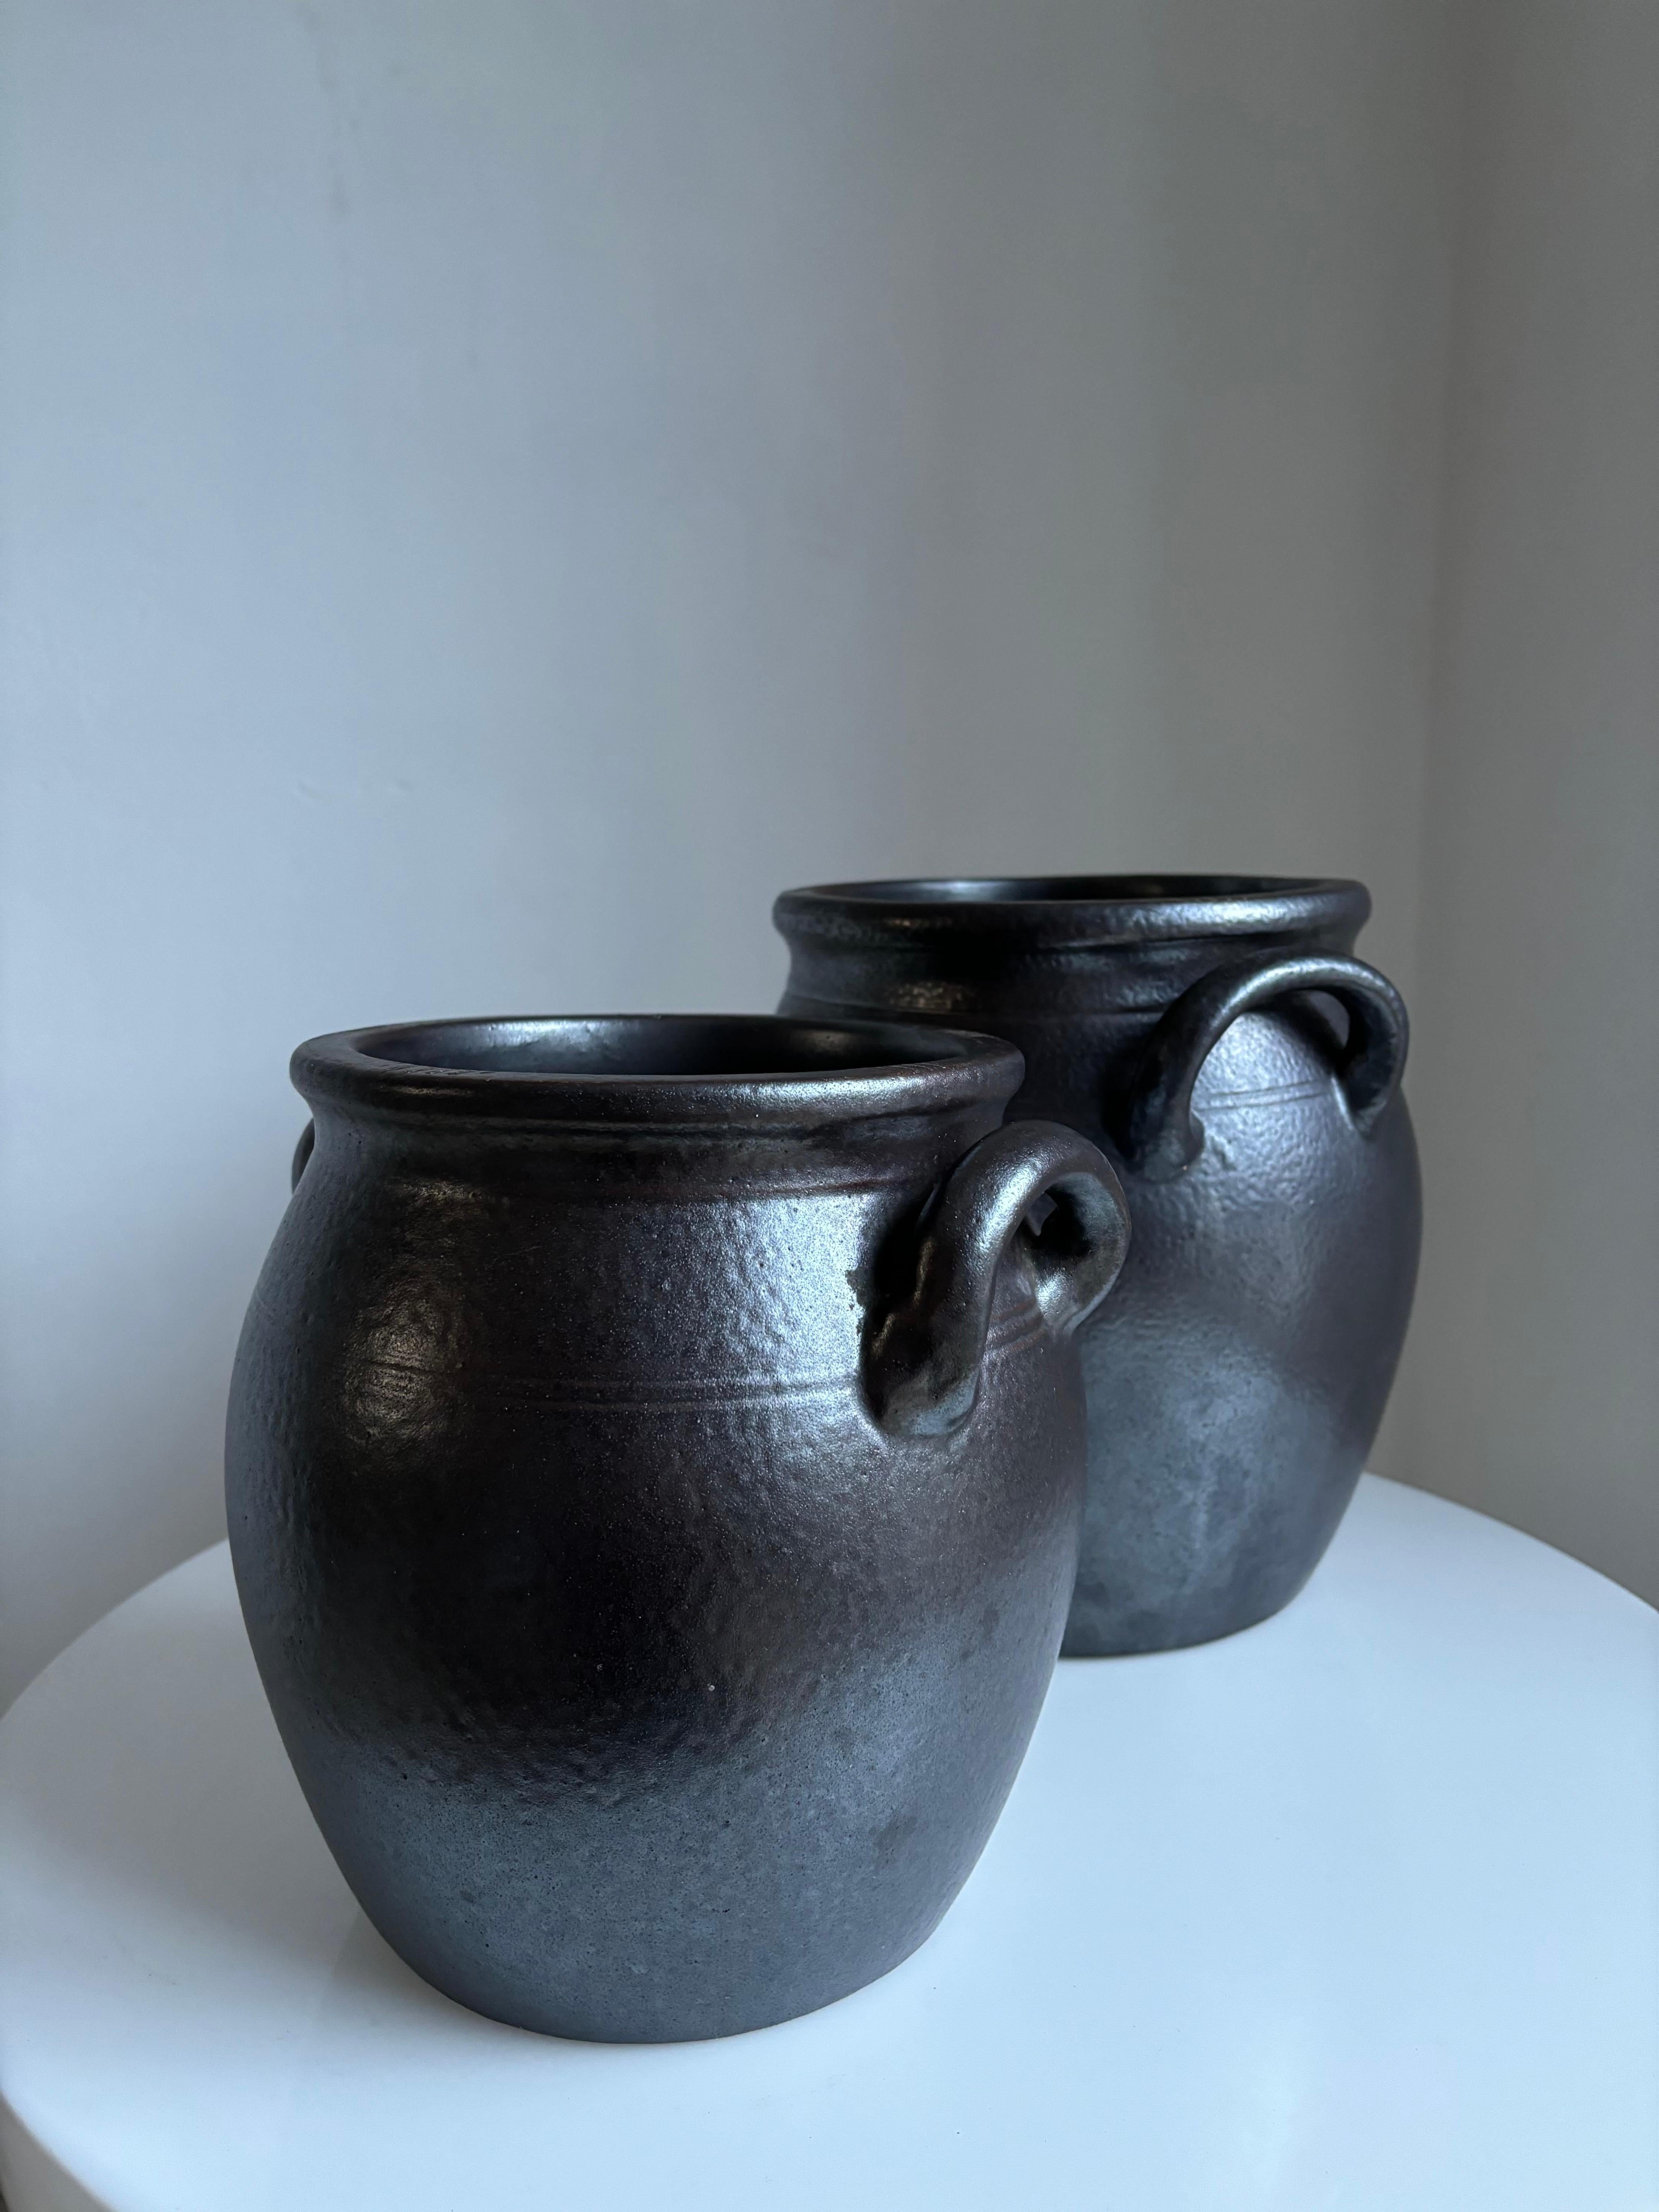 Set of two handmade potbellied stoneware jars with blackish umber brown salt glaze and two soft shaped handles. Manufactured at Höganäs Keramik in Sweden in the 1950s. Two rustic decorative midcentury items originally meant for food storage.